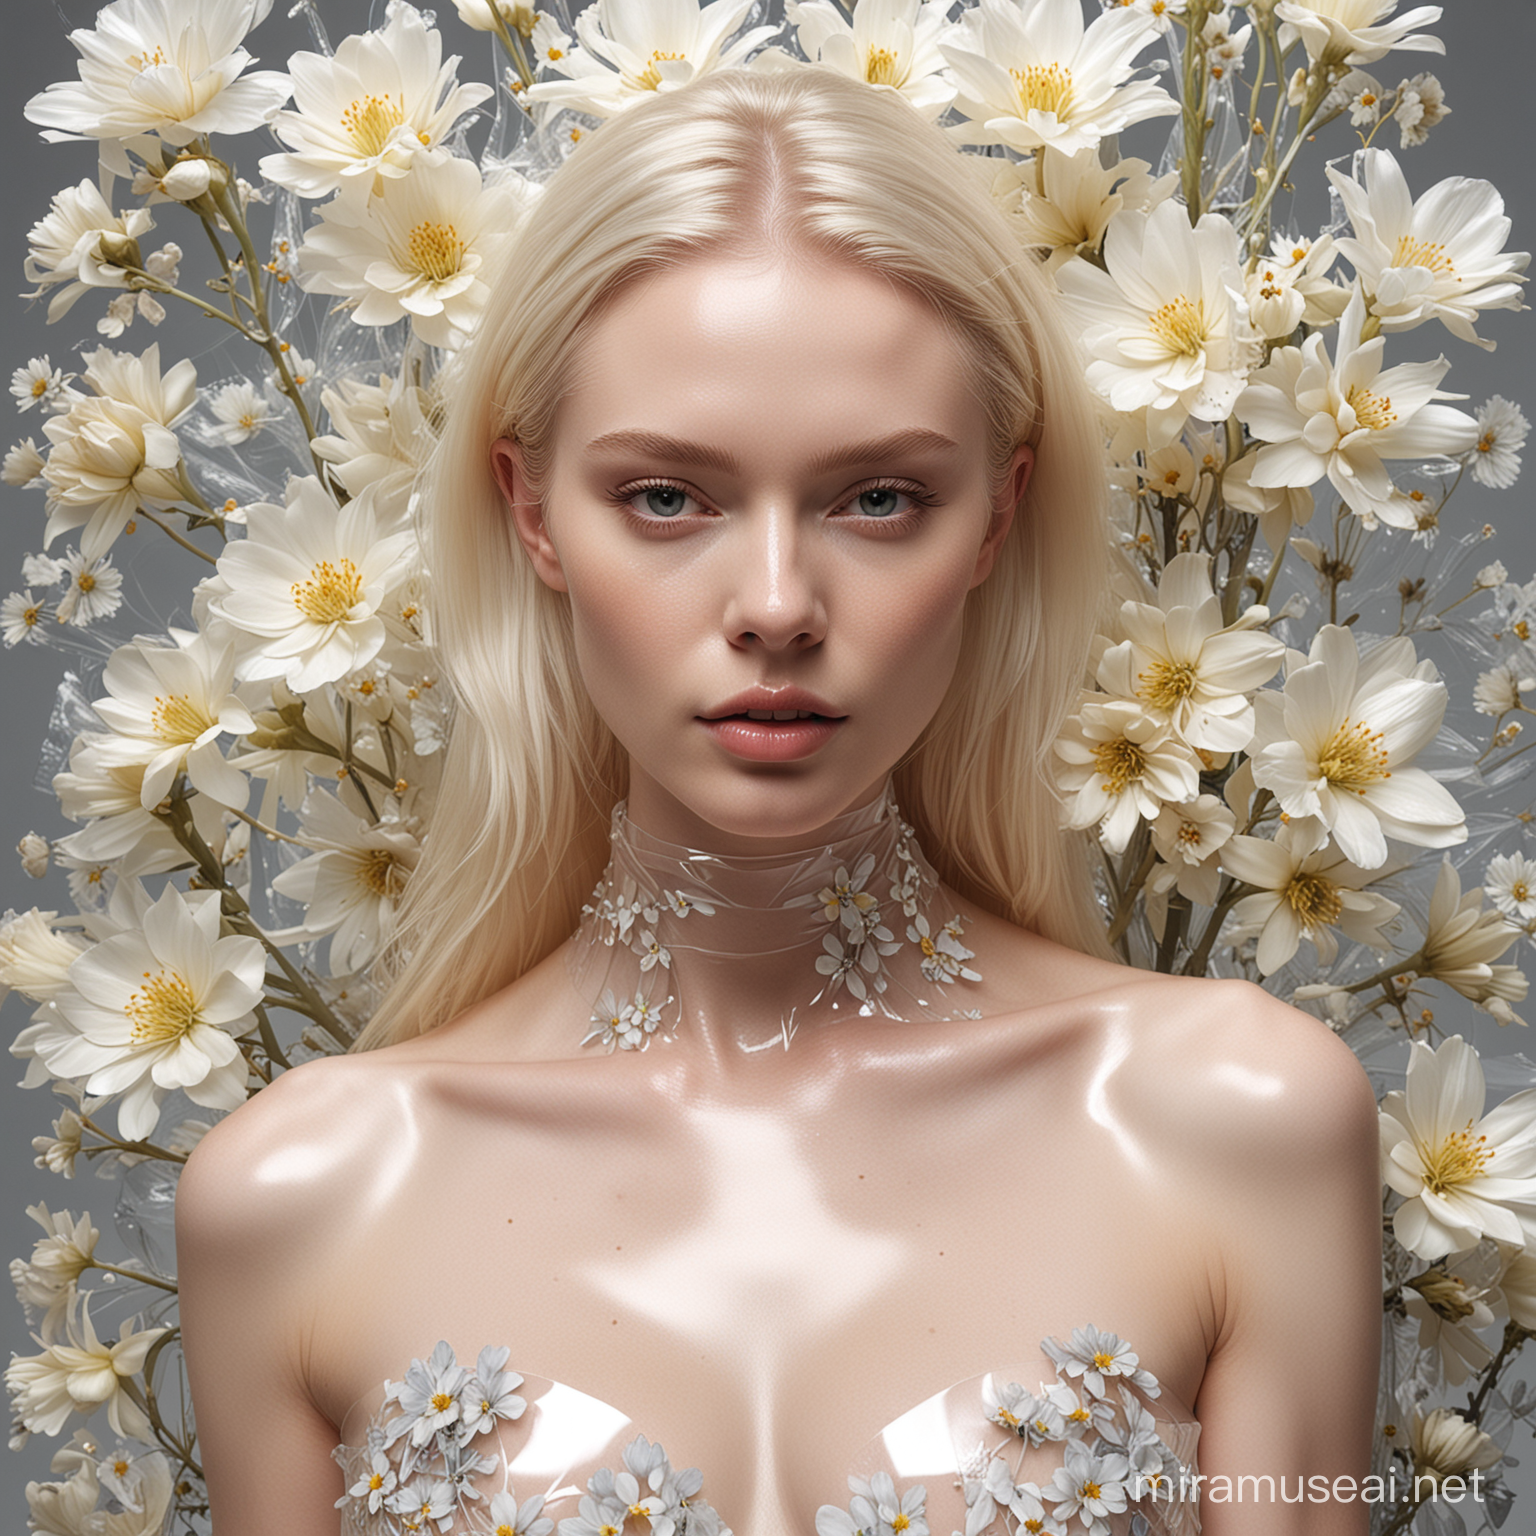 Paleskinned Model Wrapped in Transparent Film with Flowers Hyperrealistic Fashion Photoshoot